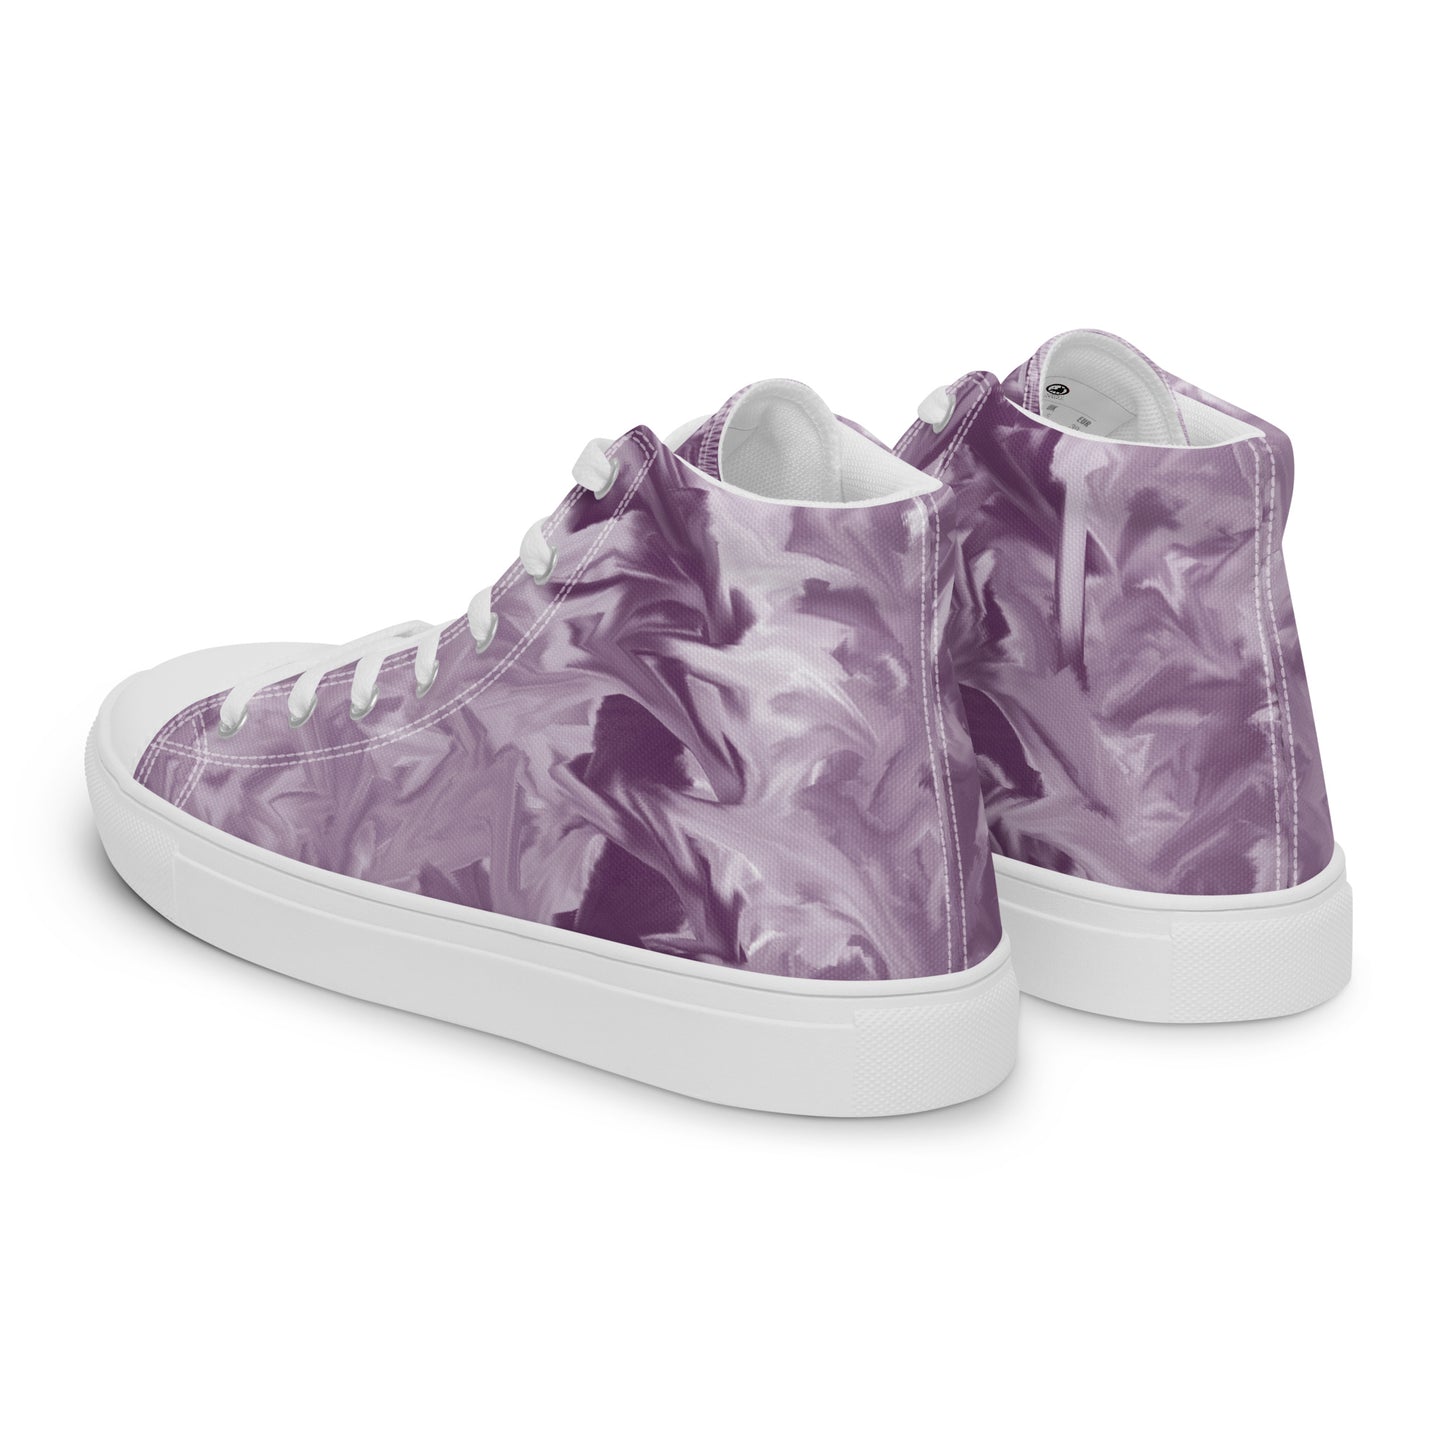 Abstract 180623 high top canvas shoes